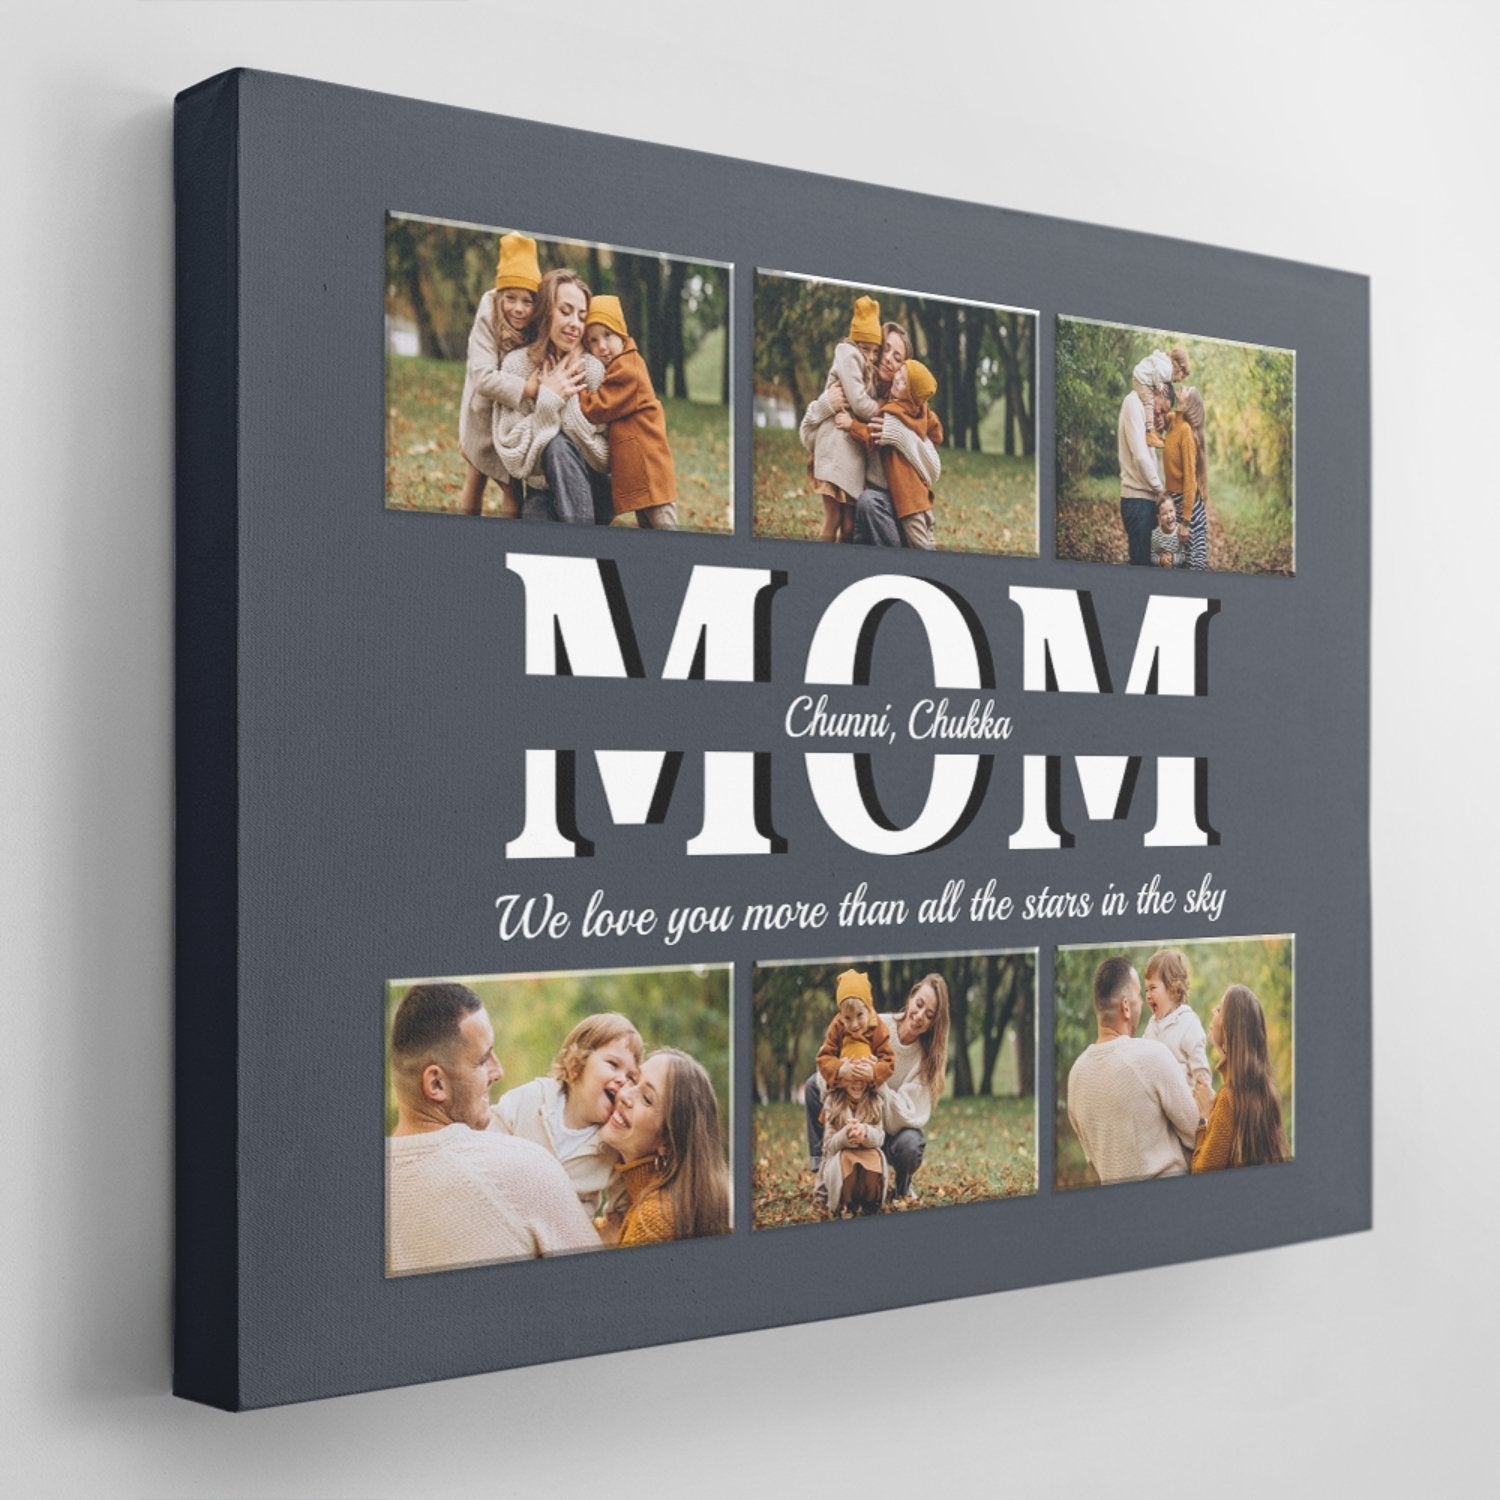 Mom Custom Text and Photo - Personalized Navy Vintage Background Canvas